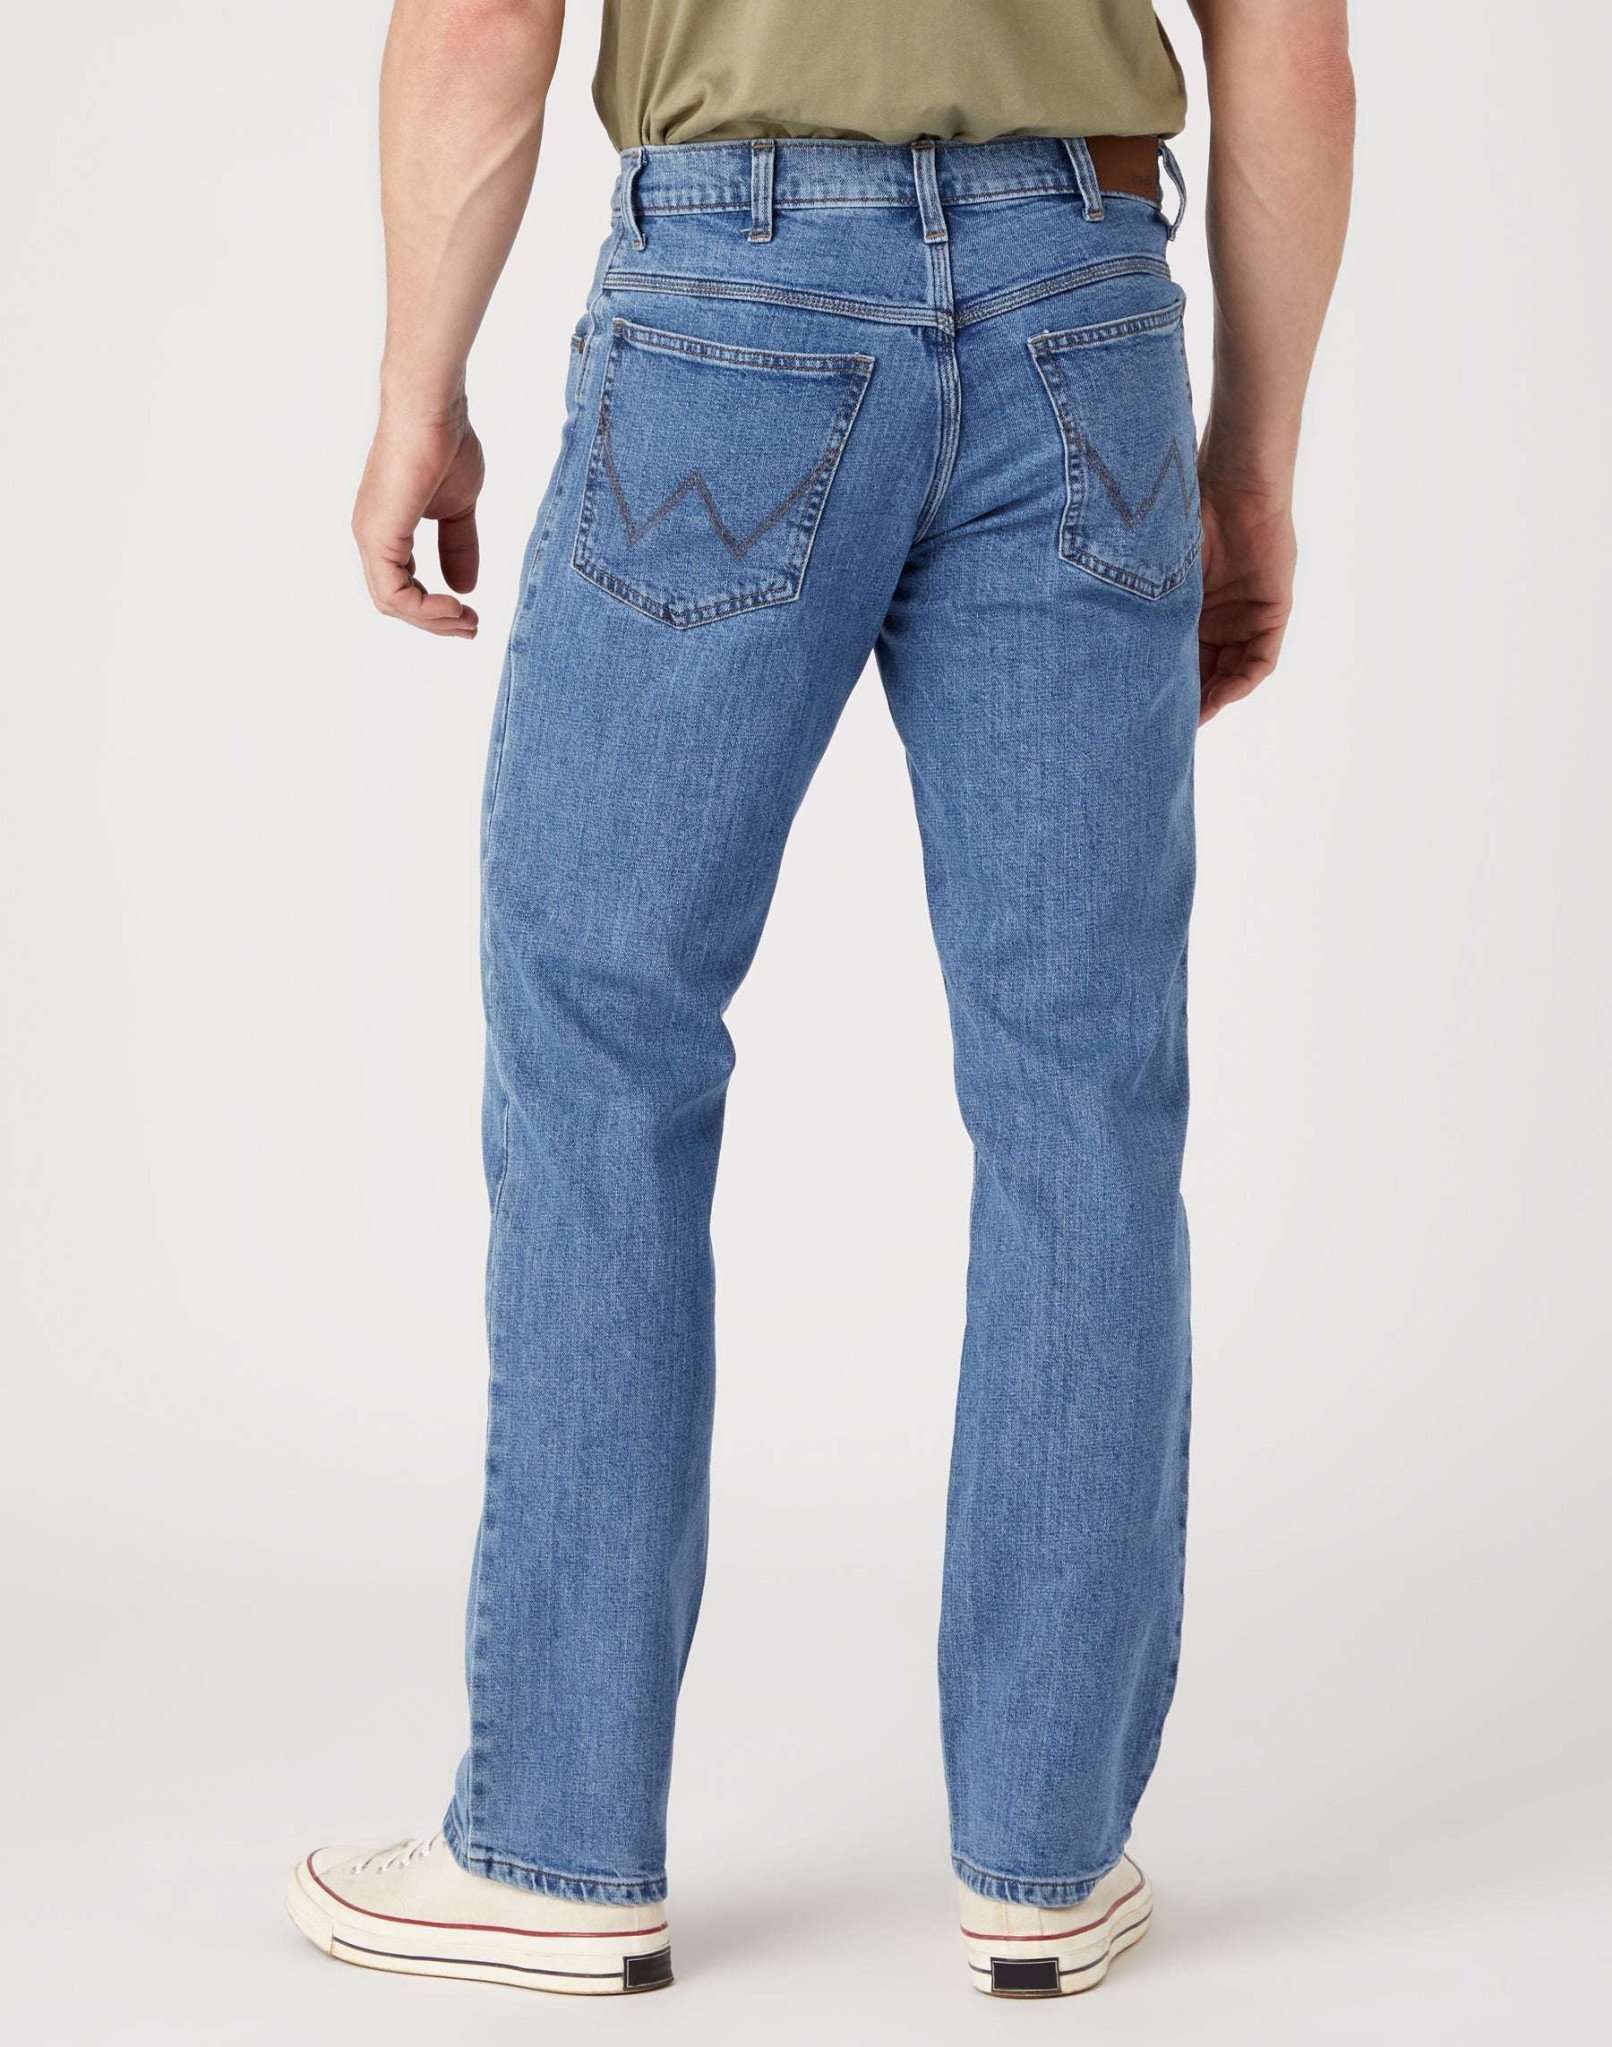 Straight Low Stretch in Great Blue Jeans Wrangler   